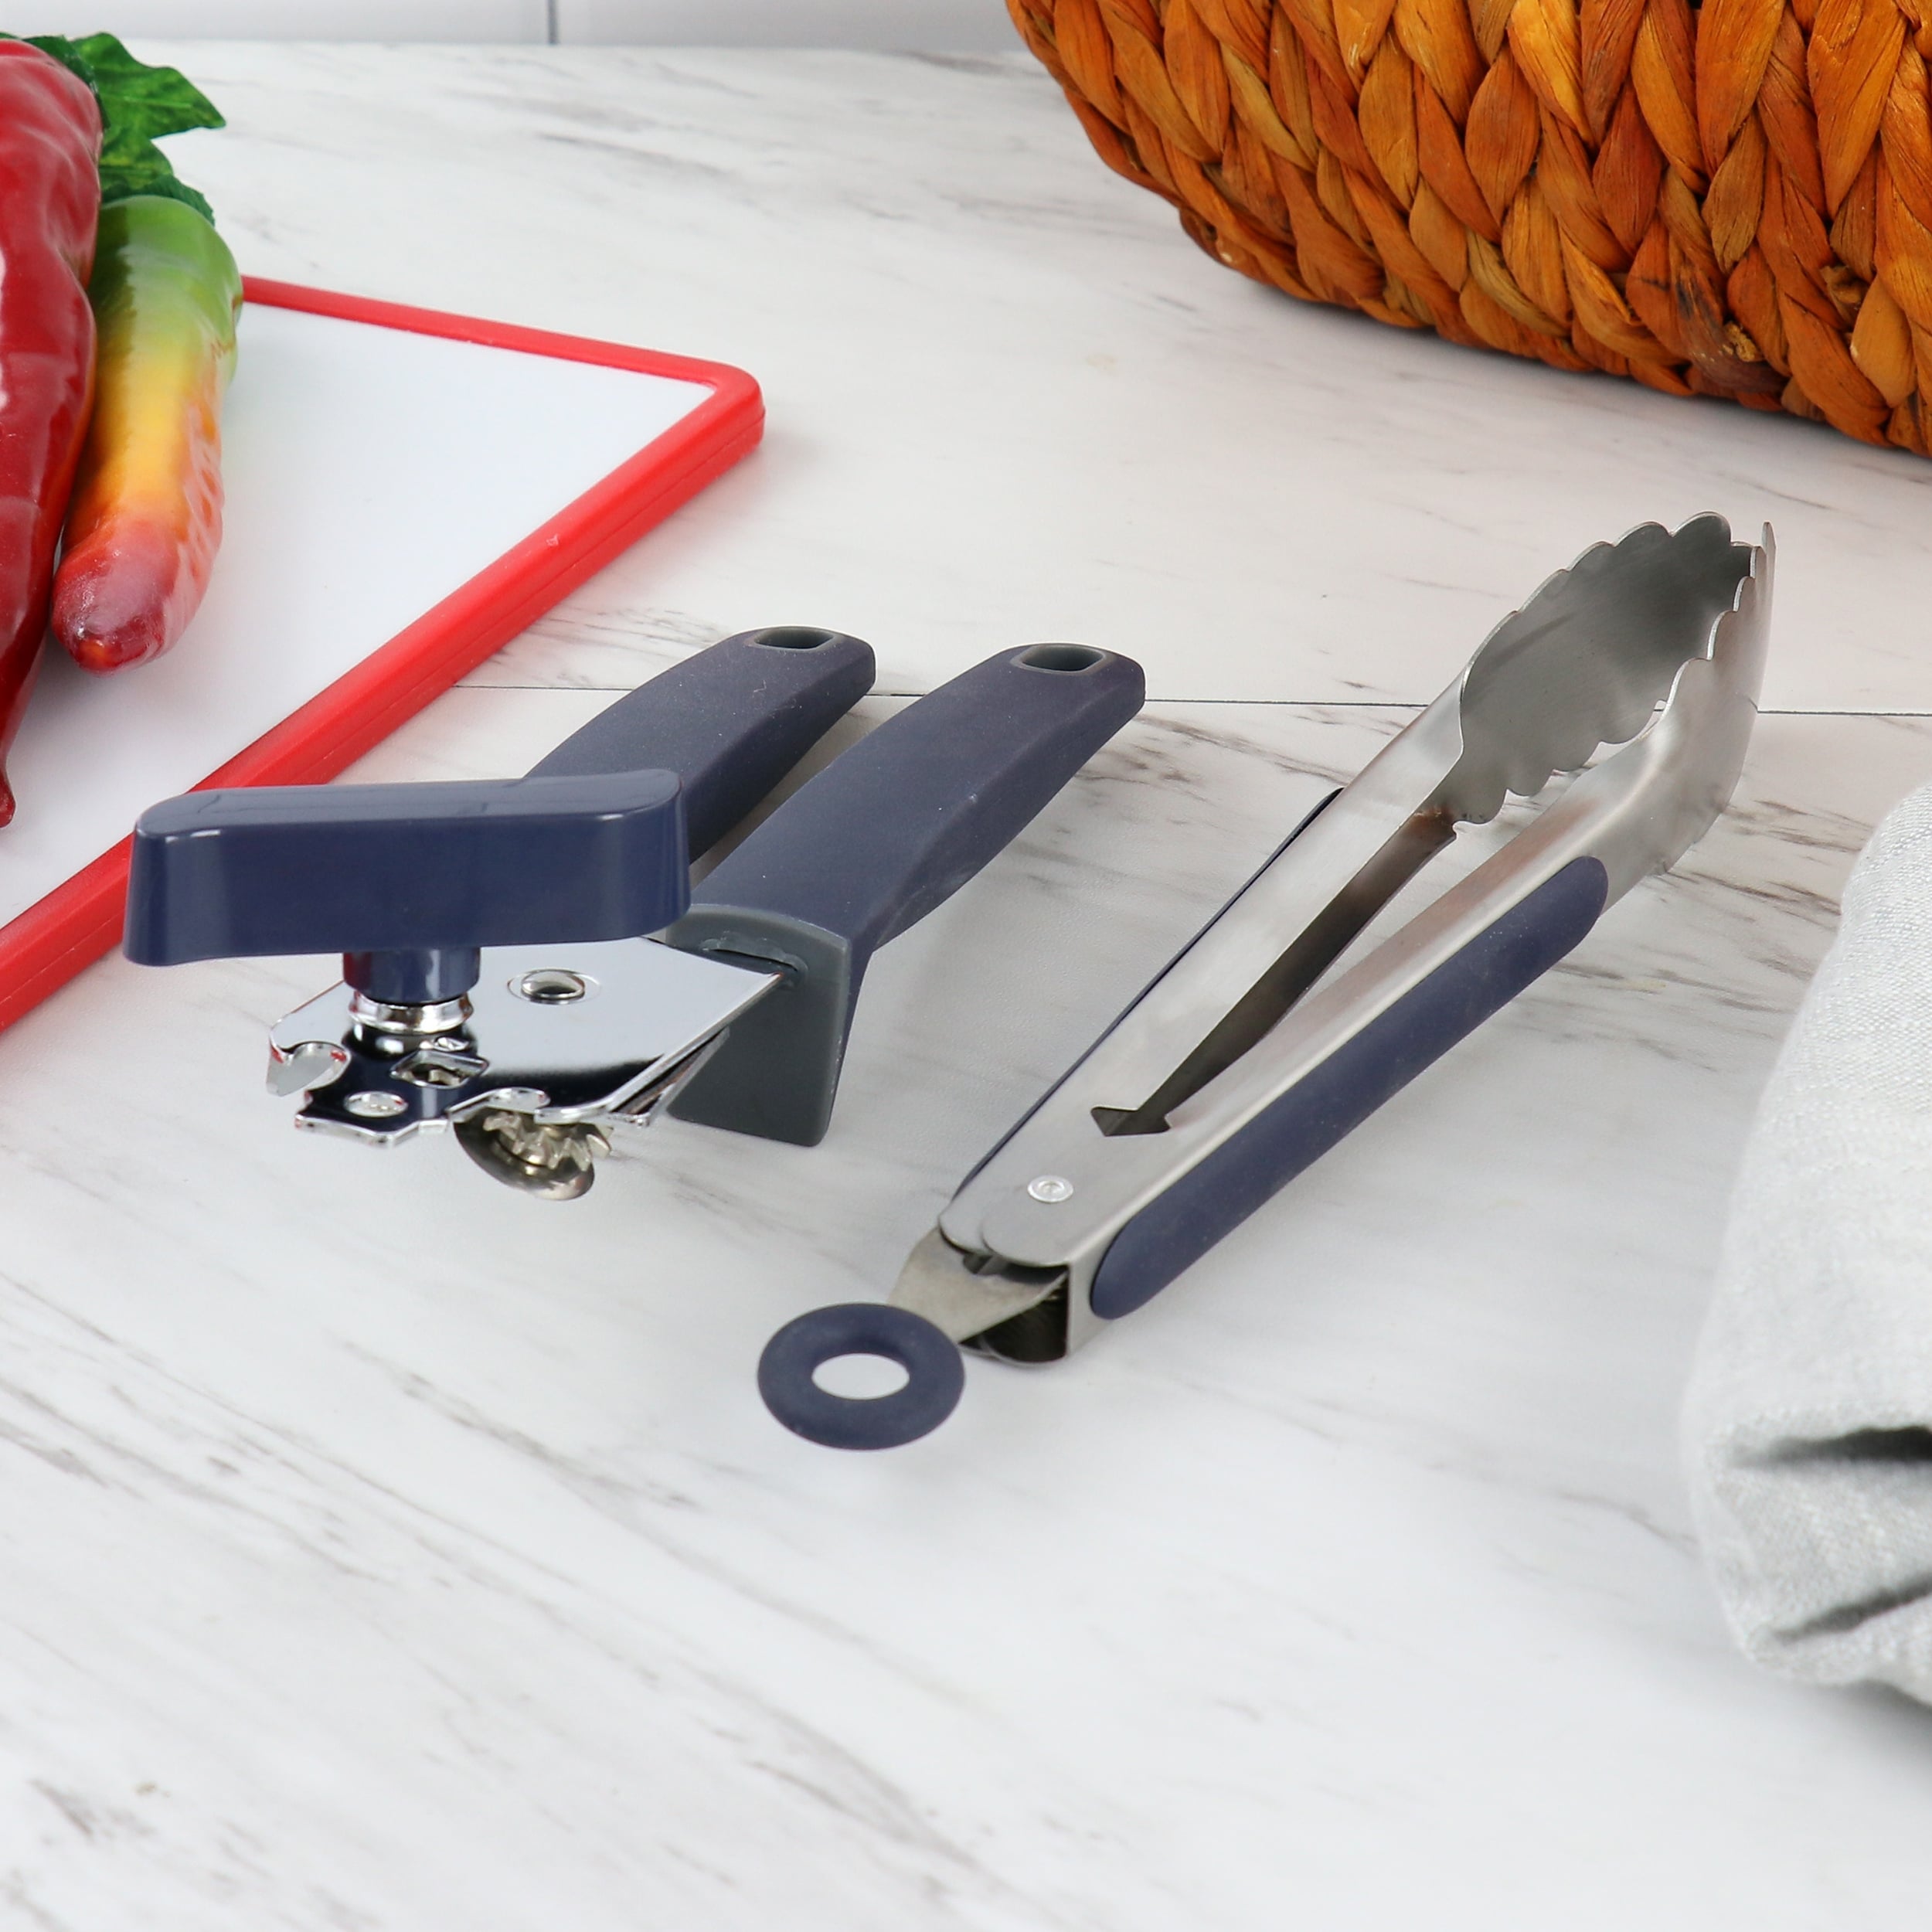 2 Piece Stainless Steel Can Opener and Tongs Set in Navy Blue